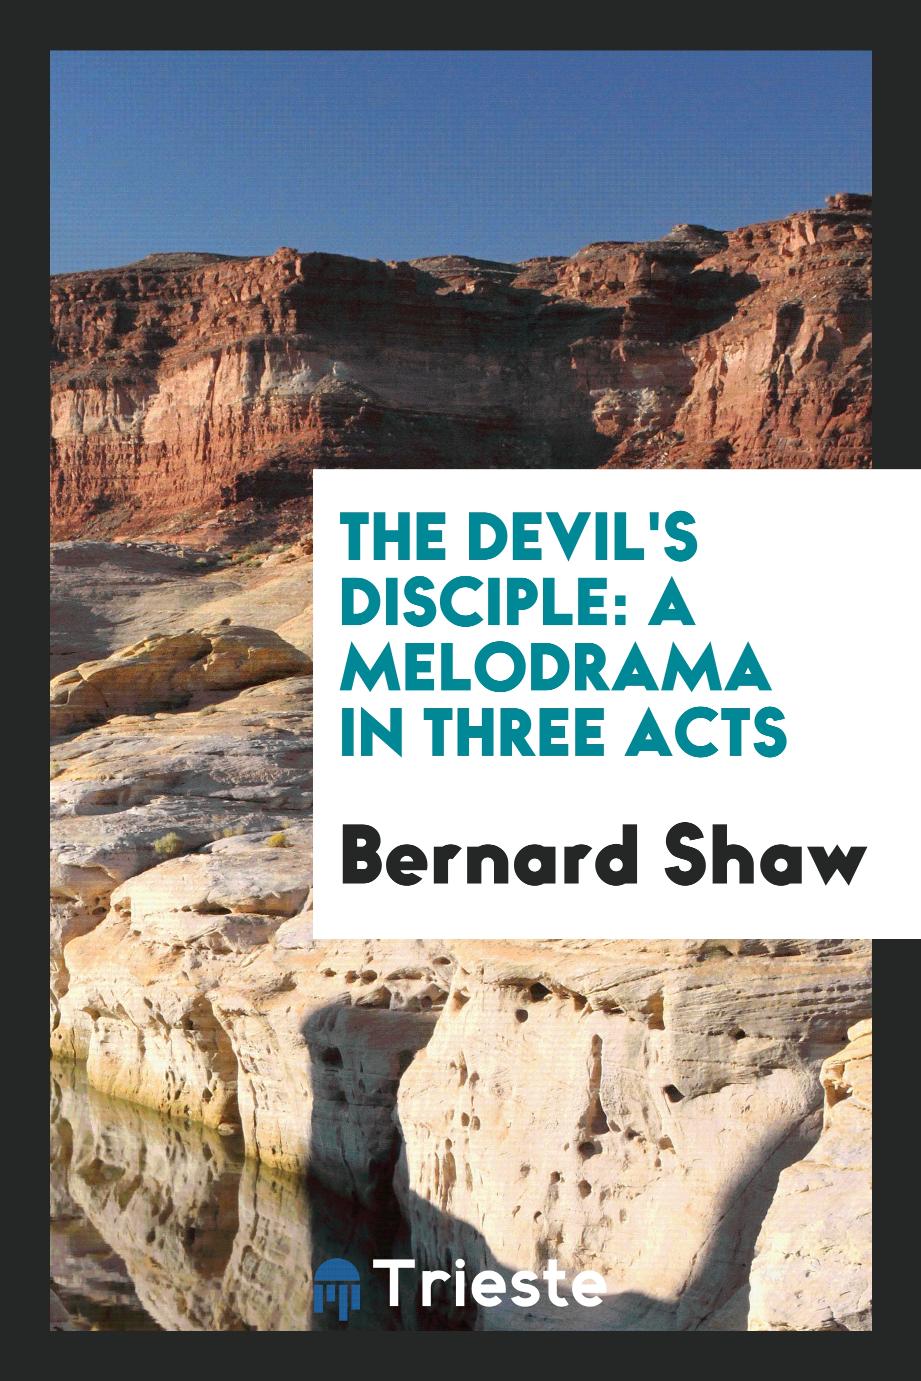 The devil's disciple: a melodrama in three acts